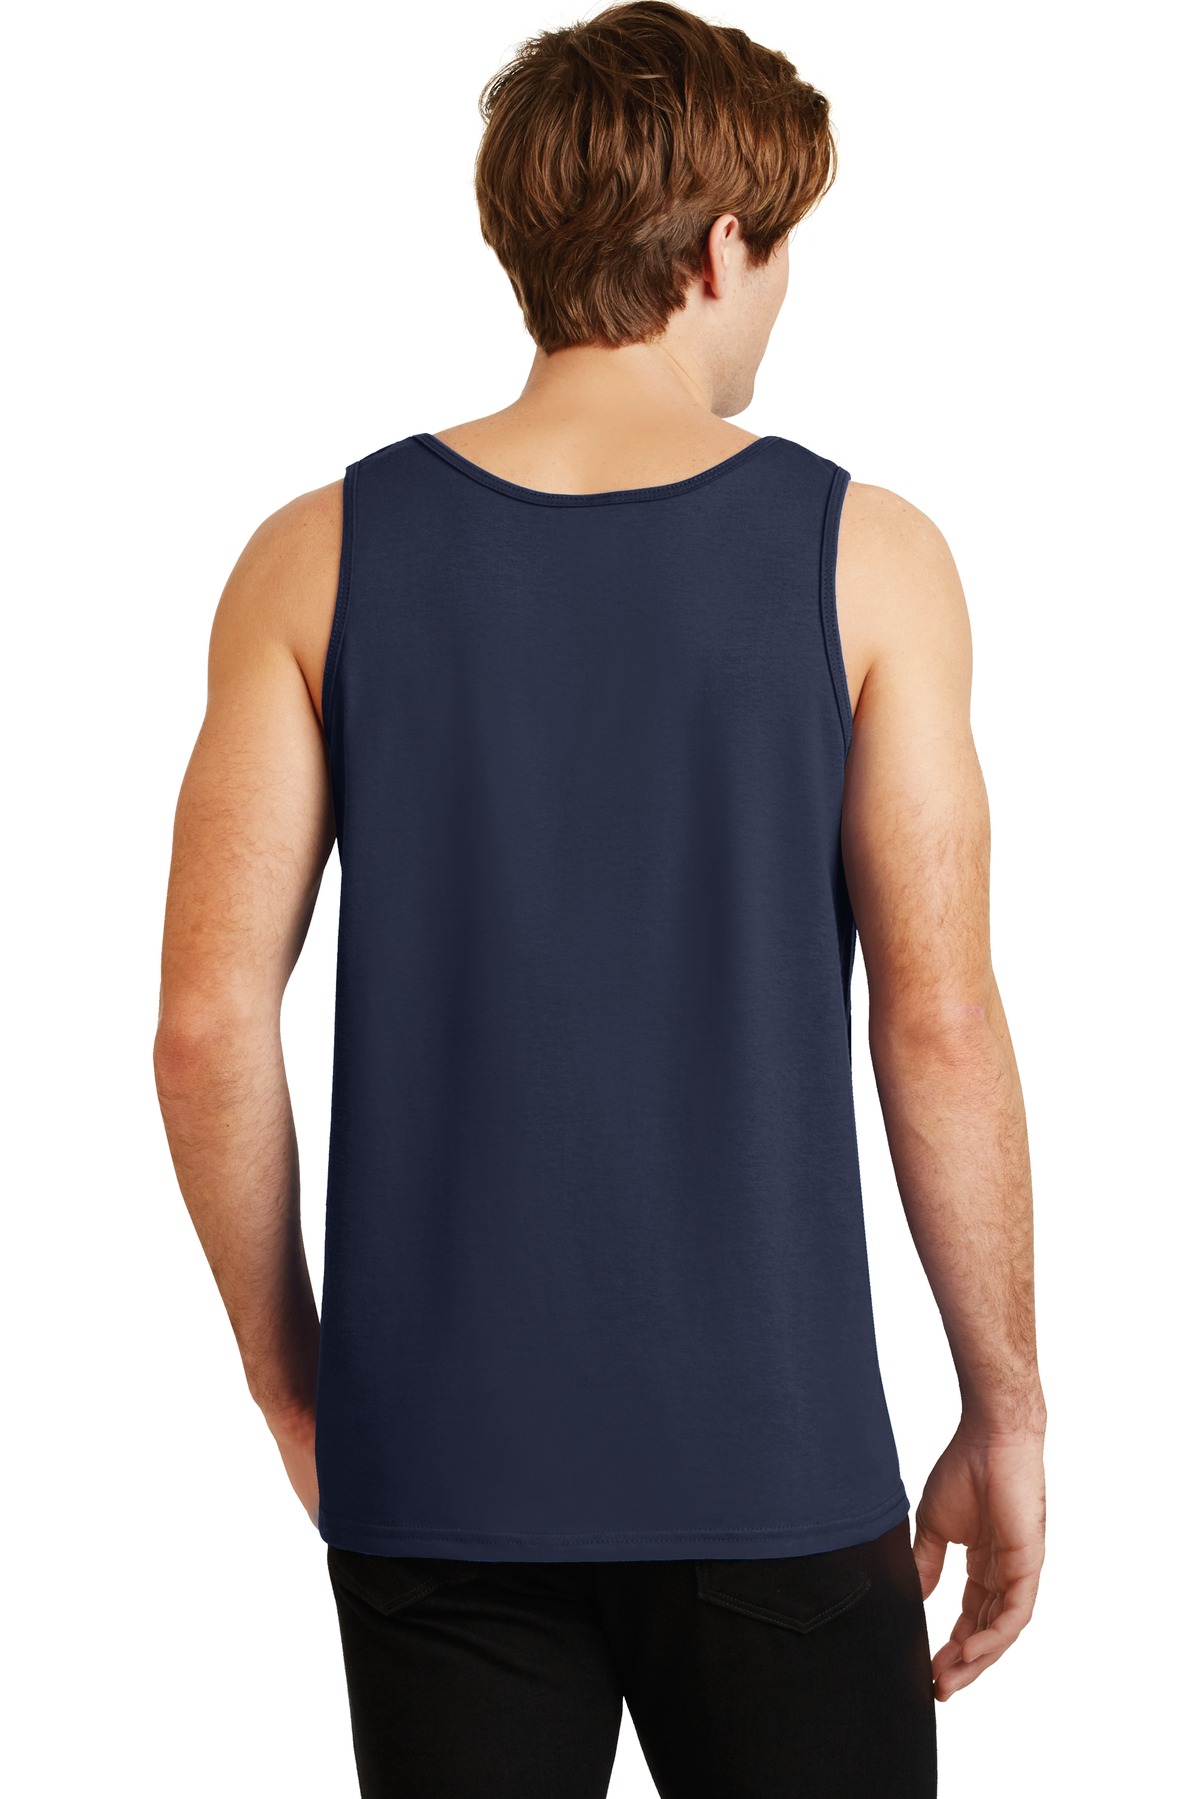 Normal is Boring - Men's Tank Top for Men, up to Men Size 3XL - San Francisco - image 3 of 5